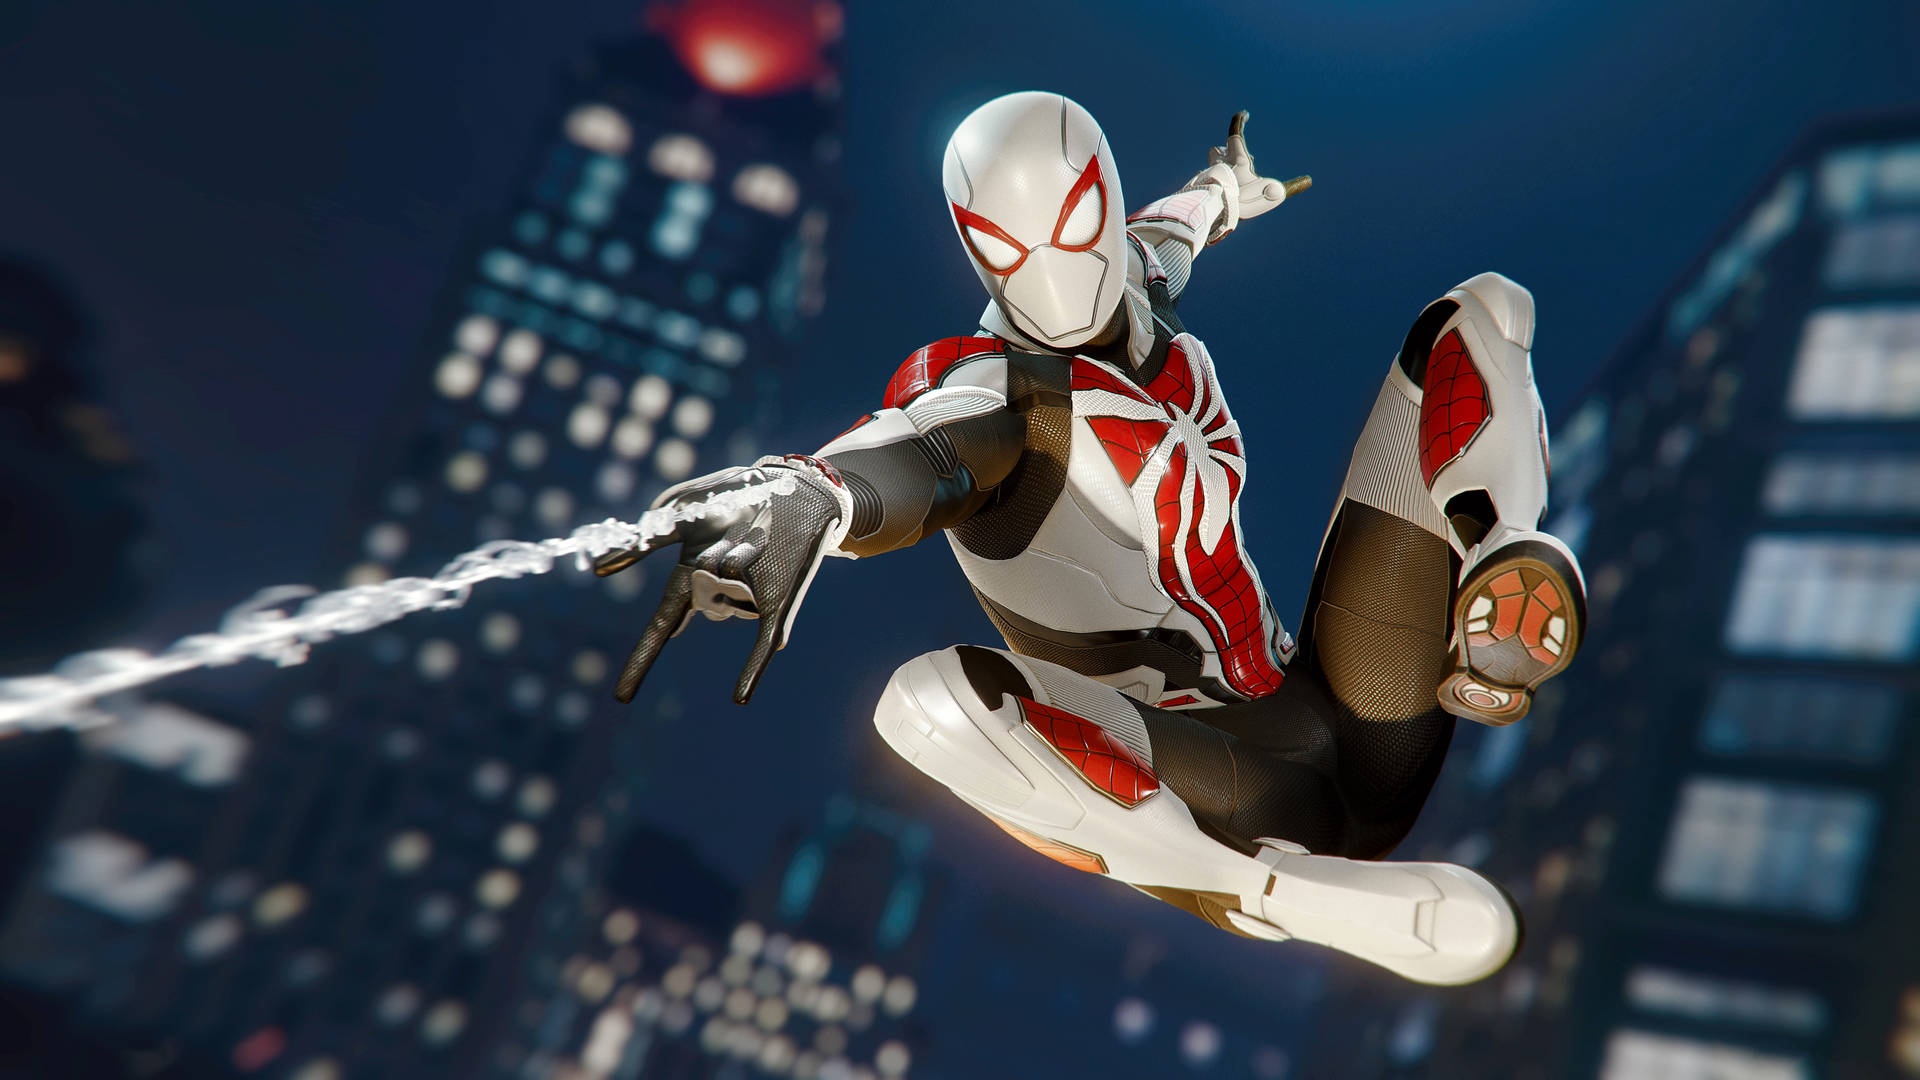 Amazing Spider-man White: Ready To Swing Into Action Wallpaper